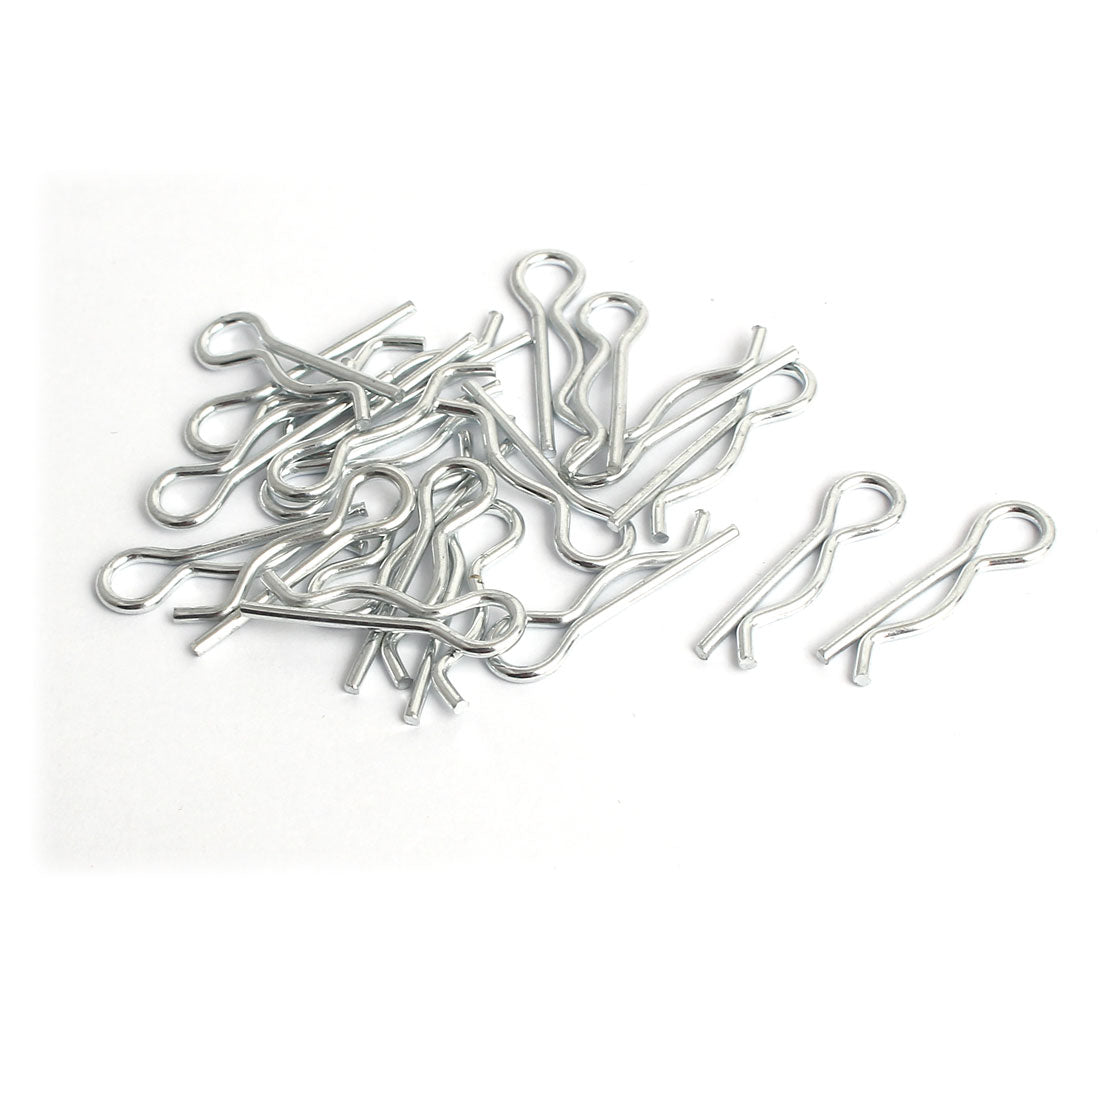 uxcell Uxcell 1.6mm x 28mm R Pins Spring Cotter Clip Hardware Silver Tone 20 Pcs